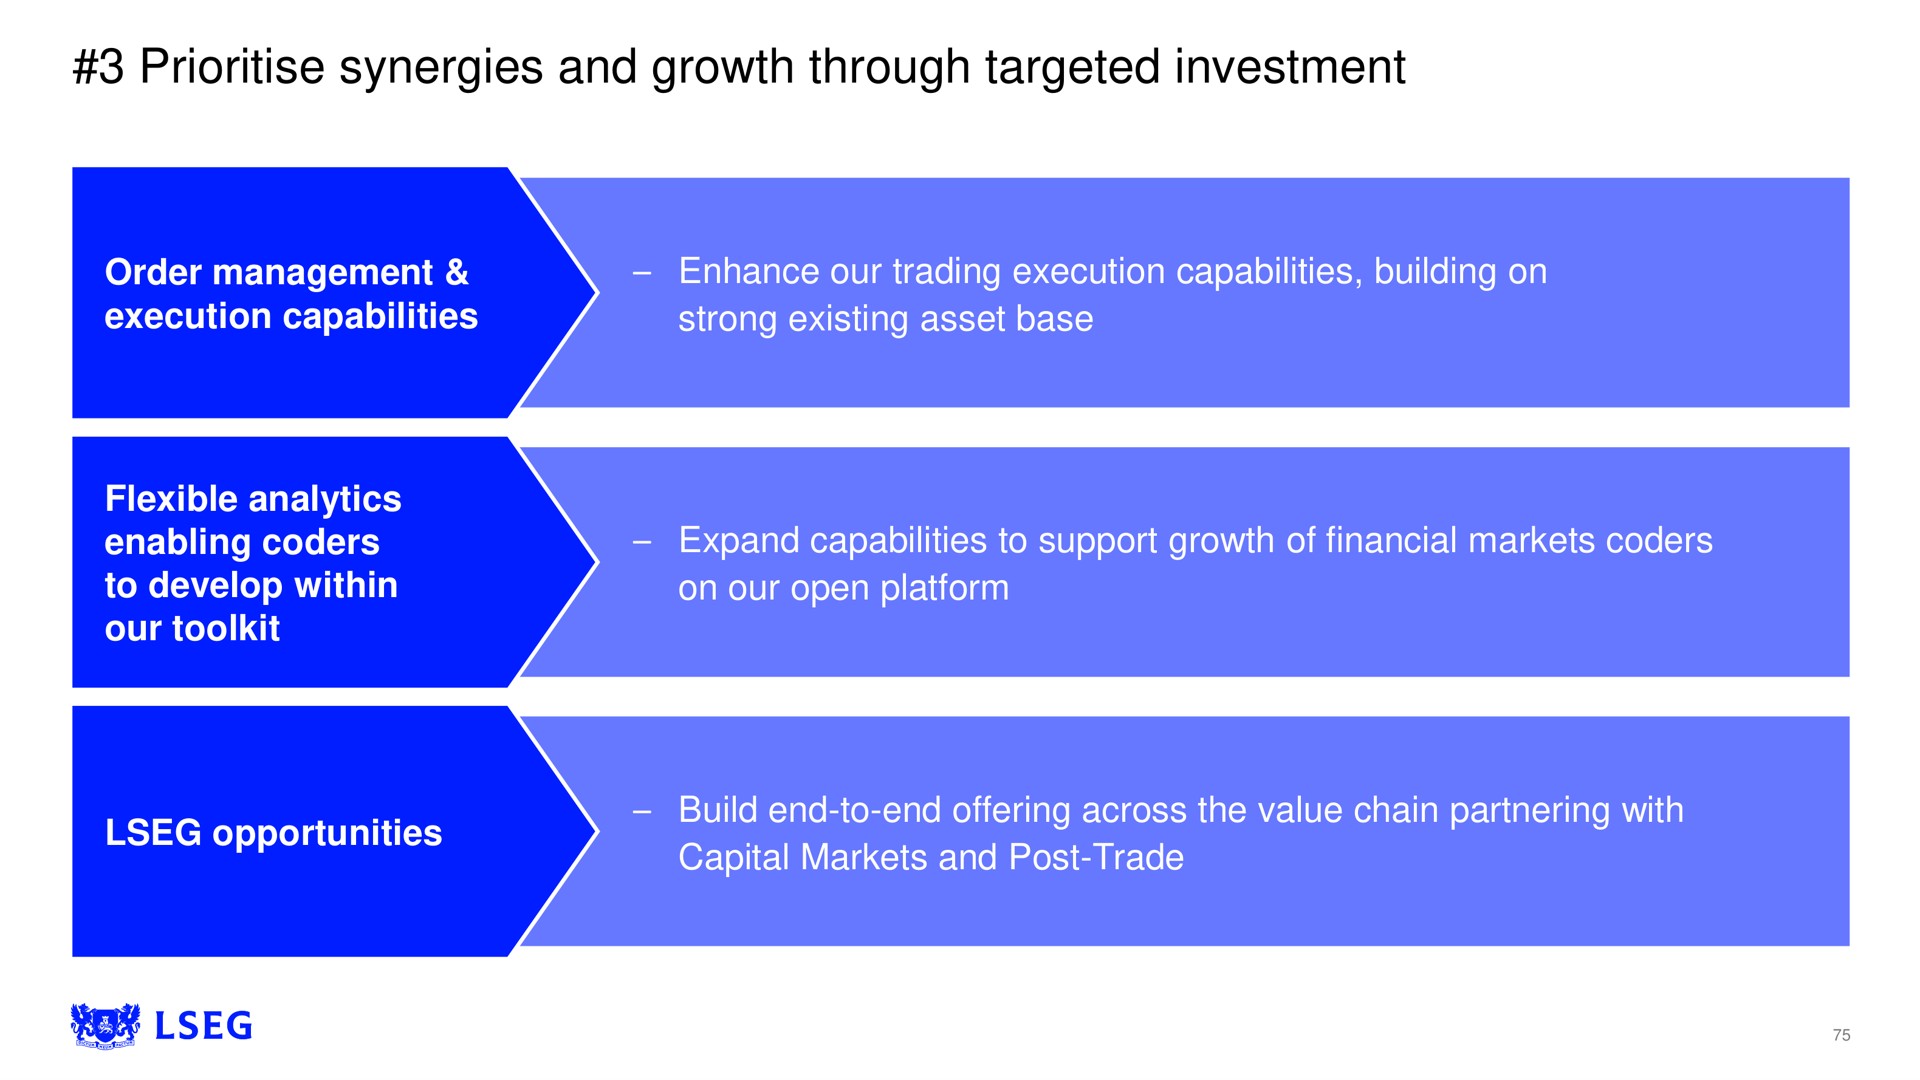 synergies and growth through targeted investment | LSE